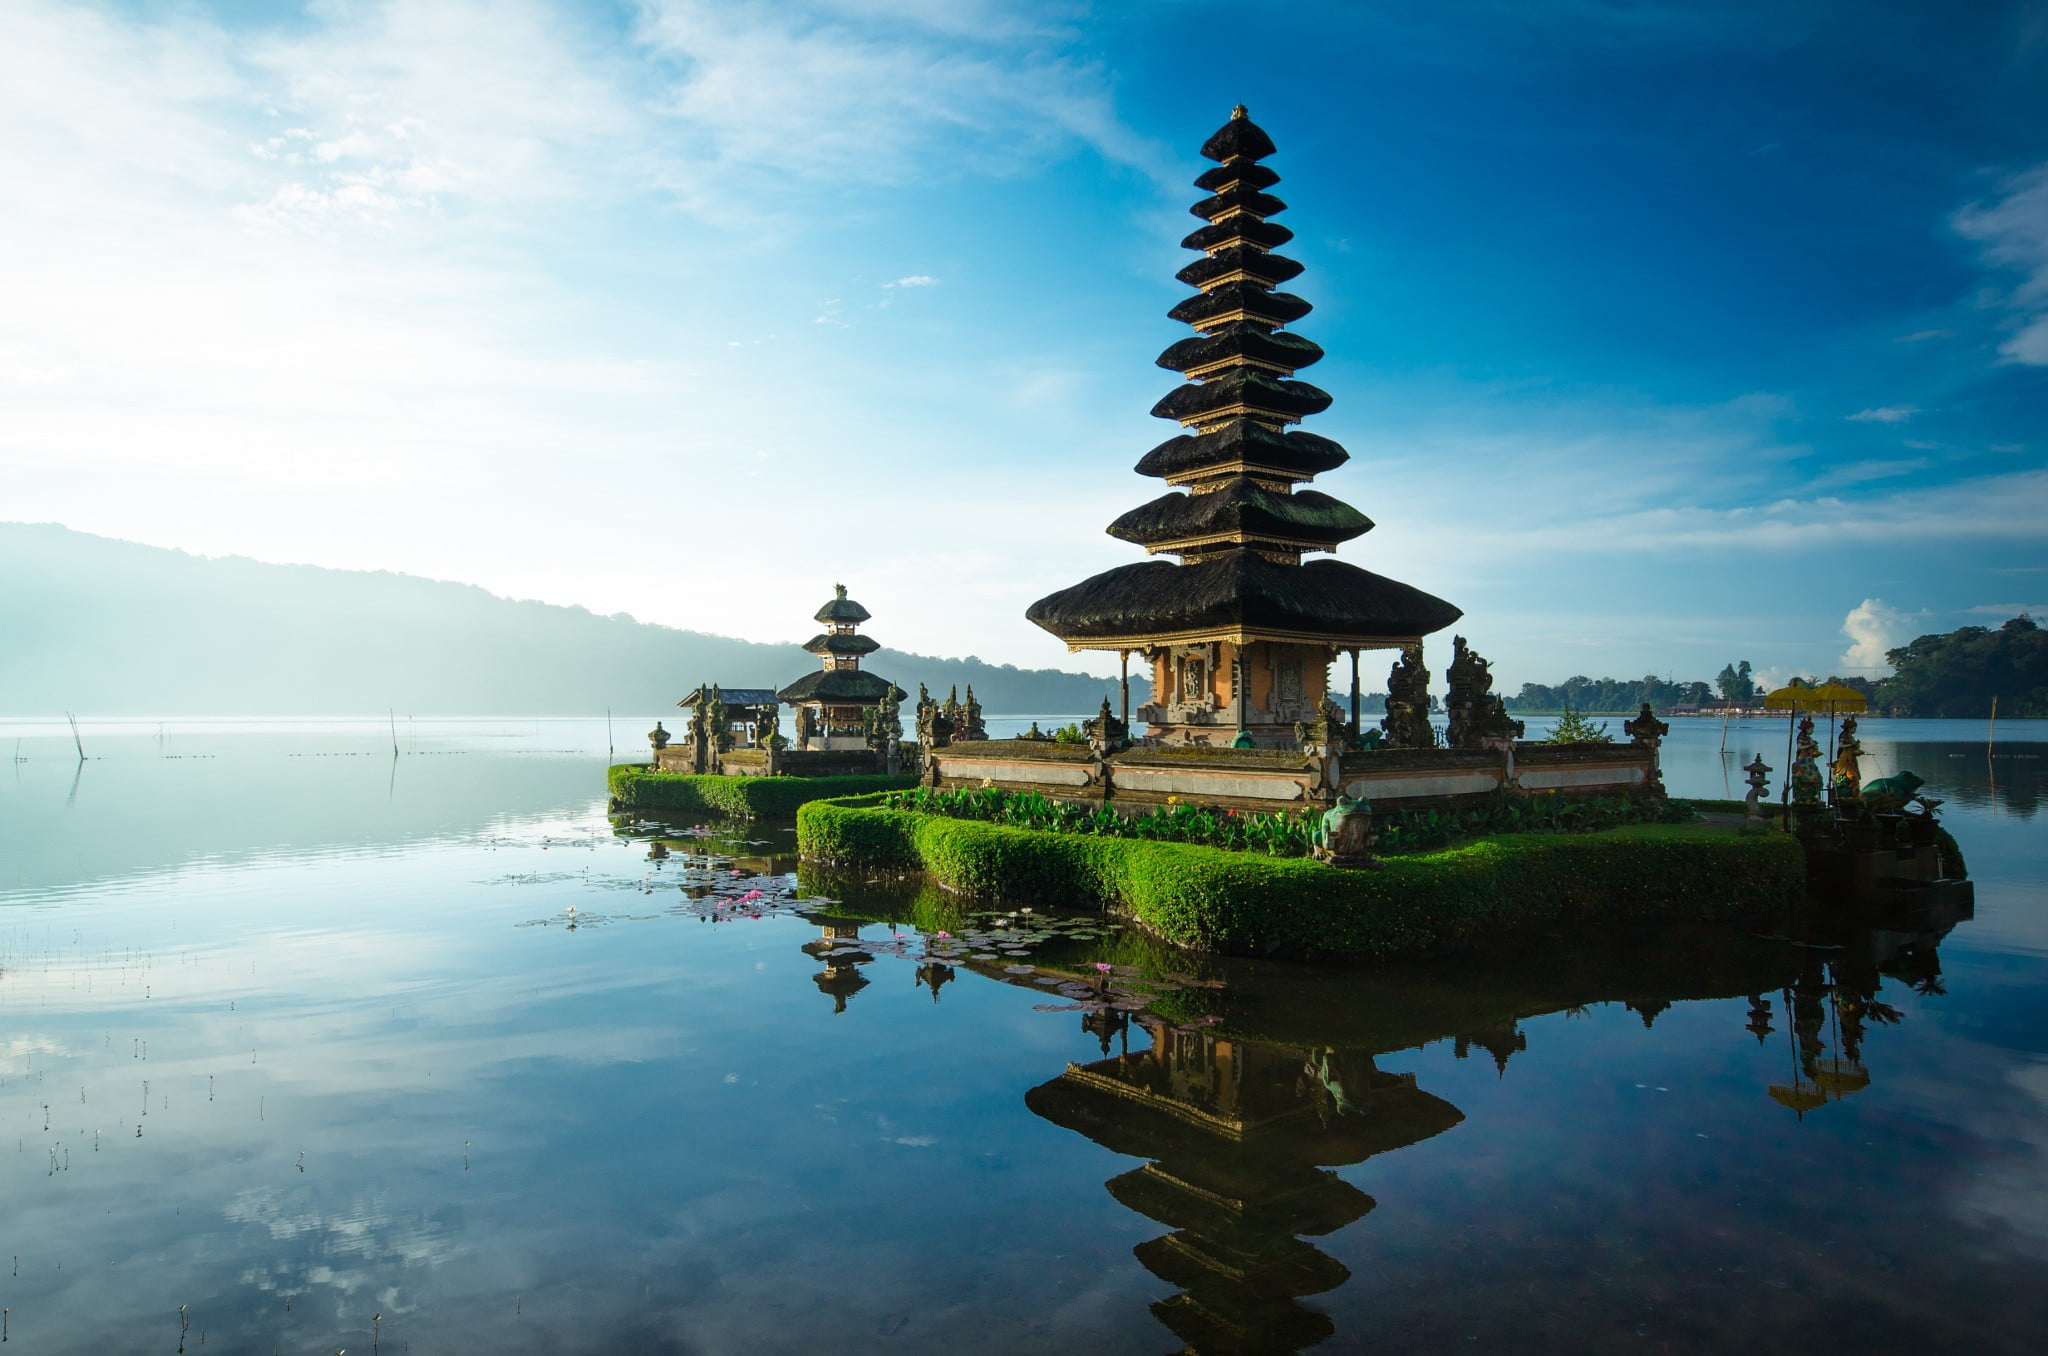 brown temple, photography, water, reflection, Bali, plants, leaves